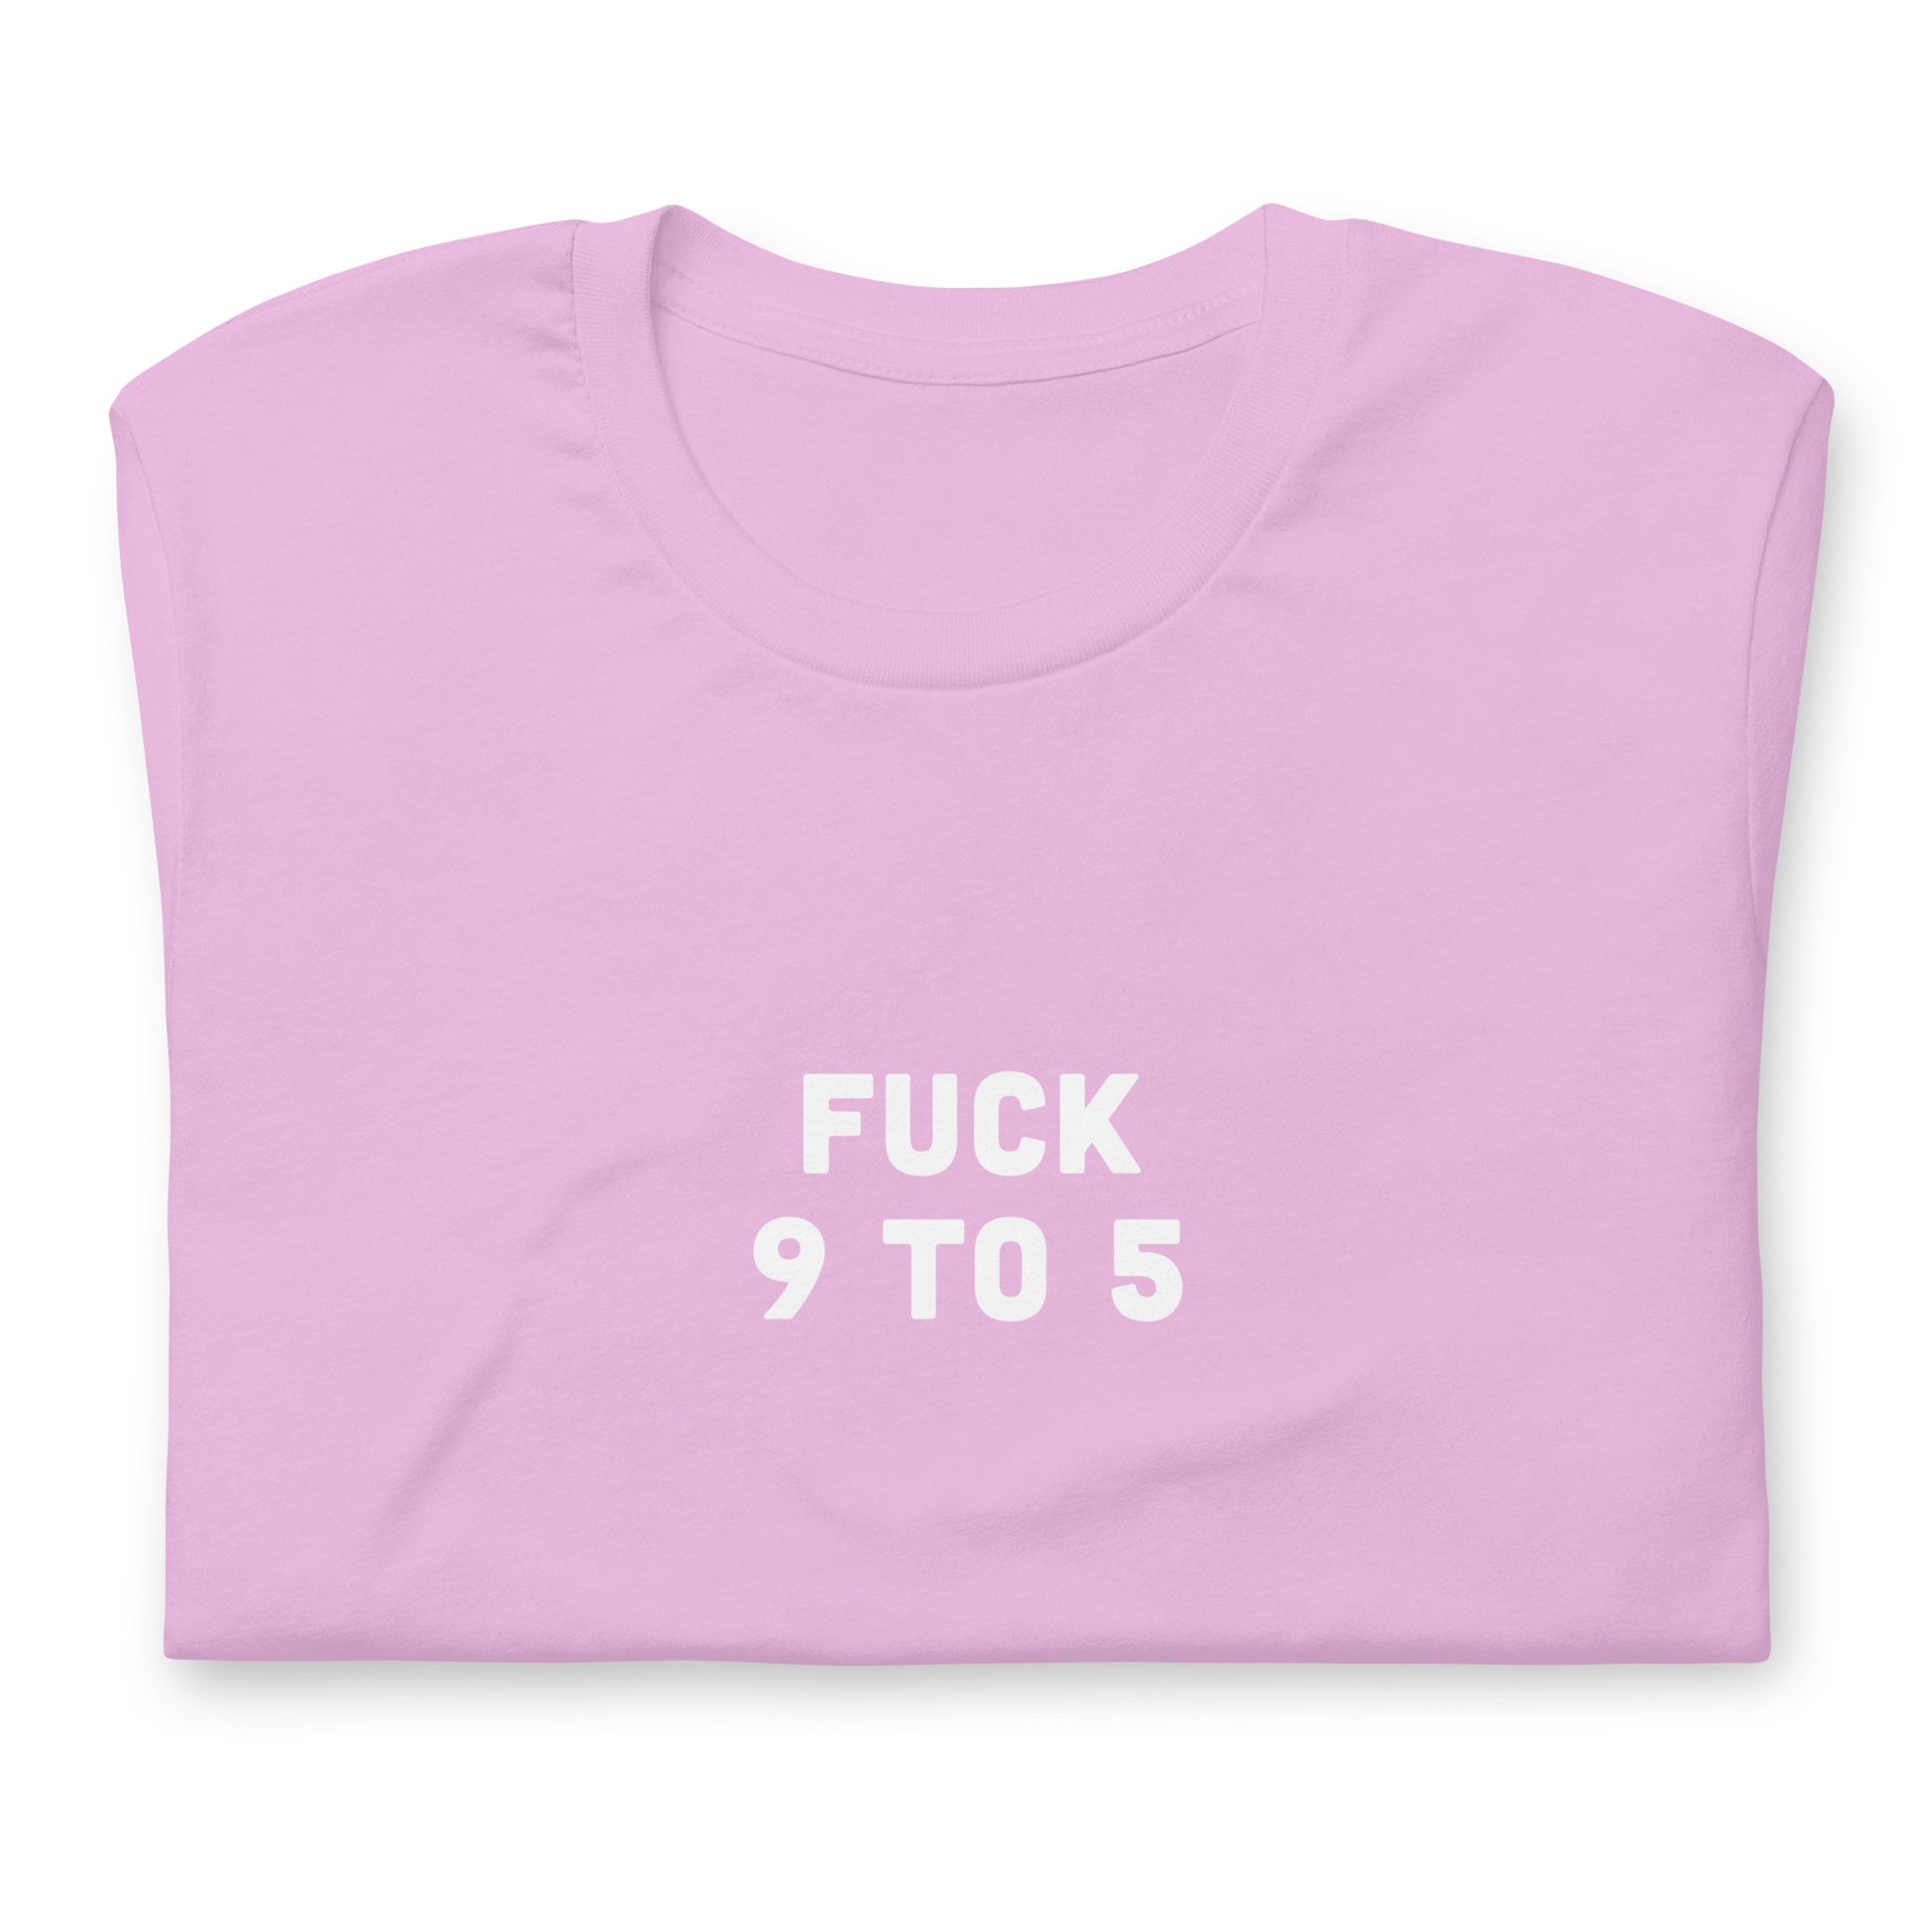 Fuck 9 To 5 T-Shirt Size 2XL Color Forest